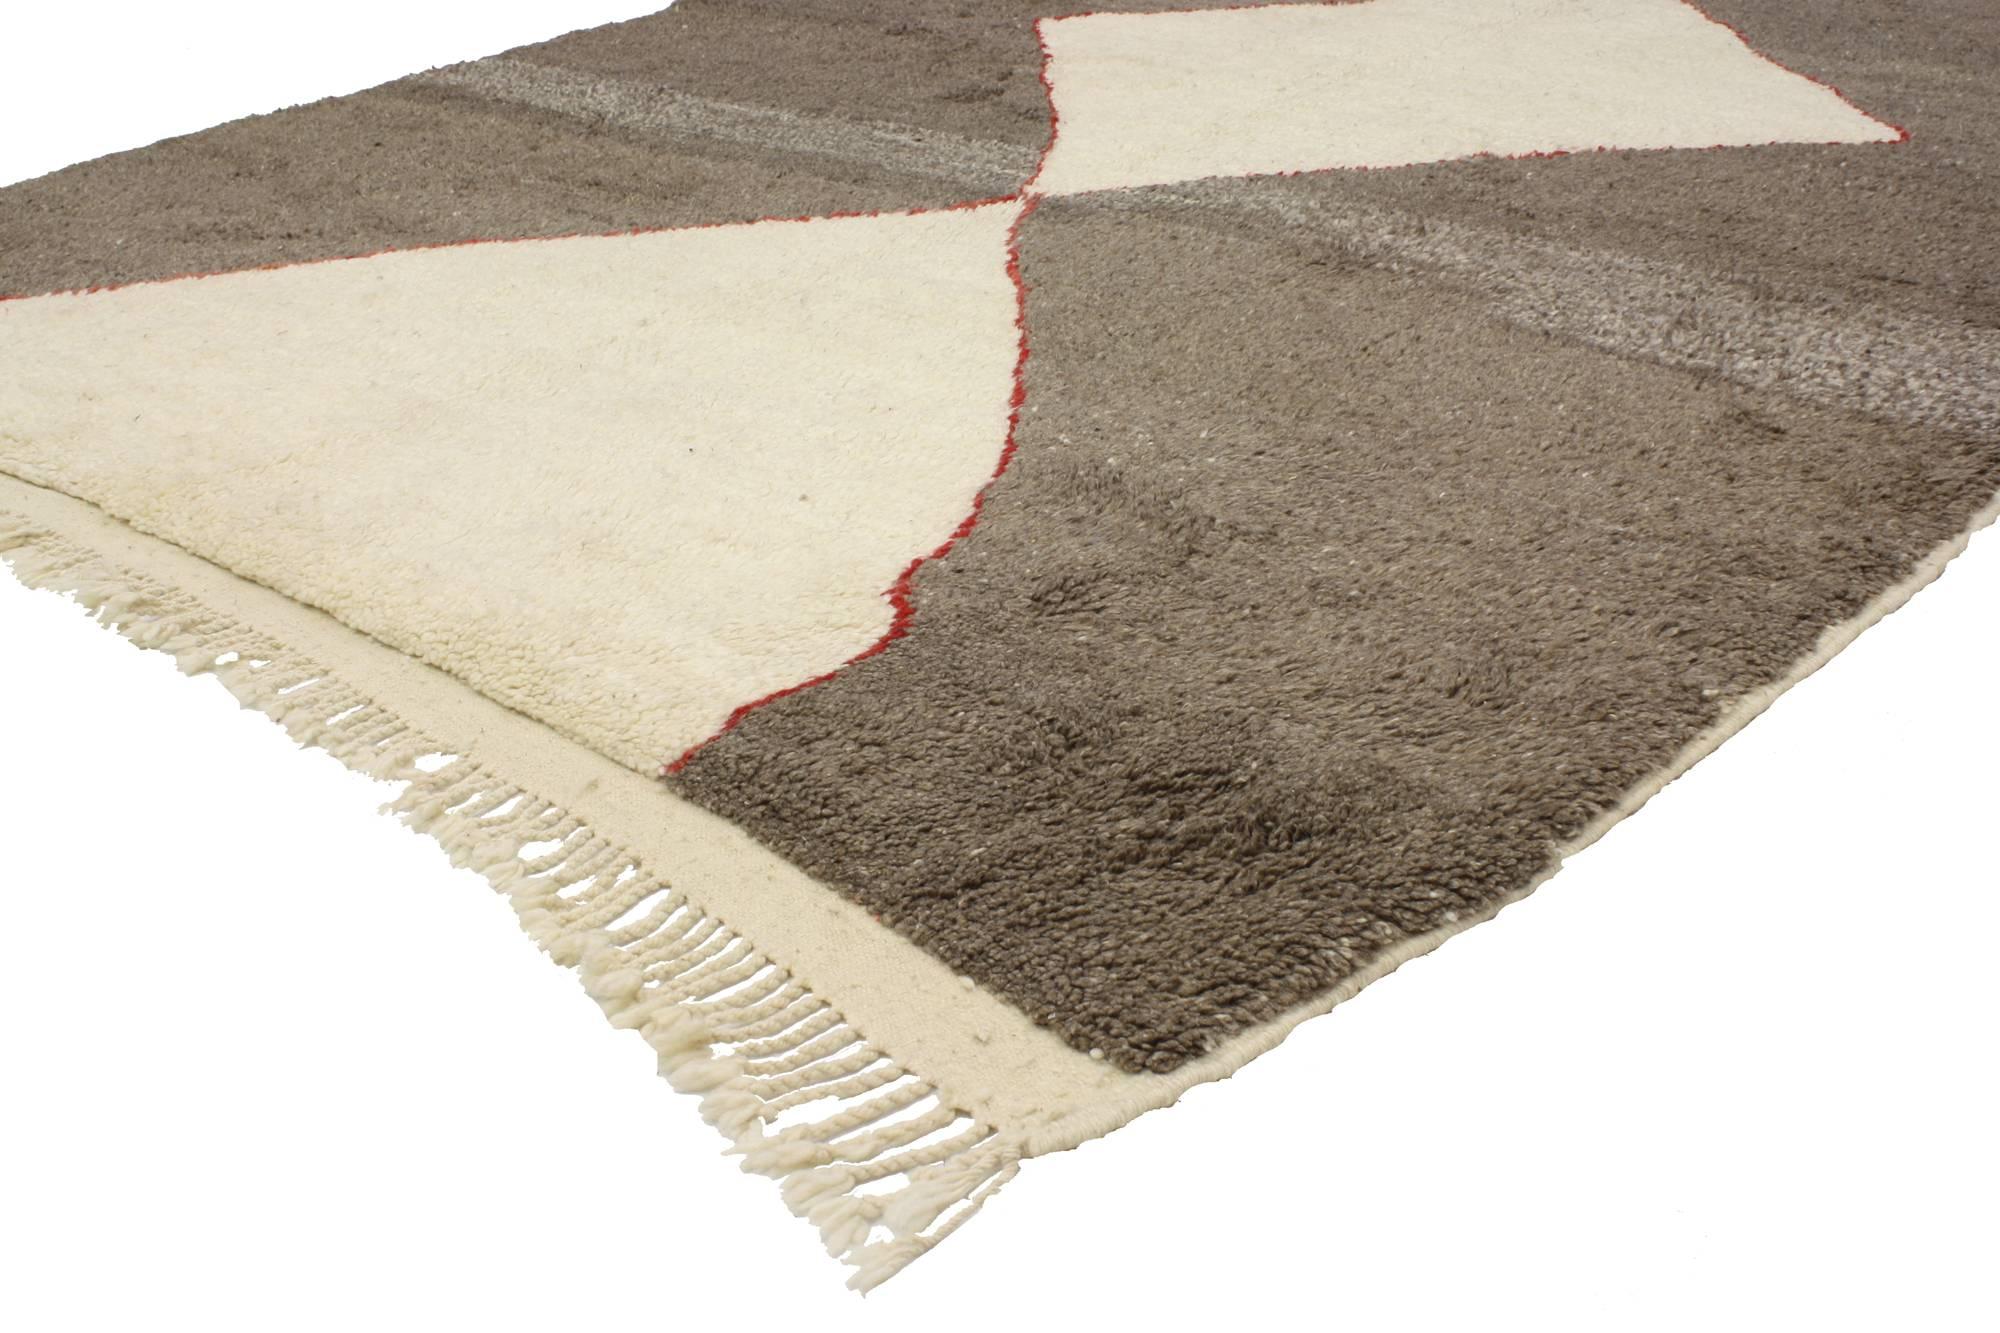 20334 New Contemporary Berber Moroccan Rug with Mid-Century Modern Style 07'04 x 09'11. With  strong linear lines and Mid-Century Modern design, this hand-knotted wool contemporary Berber Moroccan rug exudes warmth and cozy casual vibes. It features